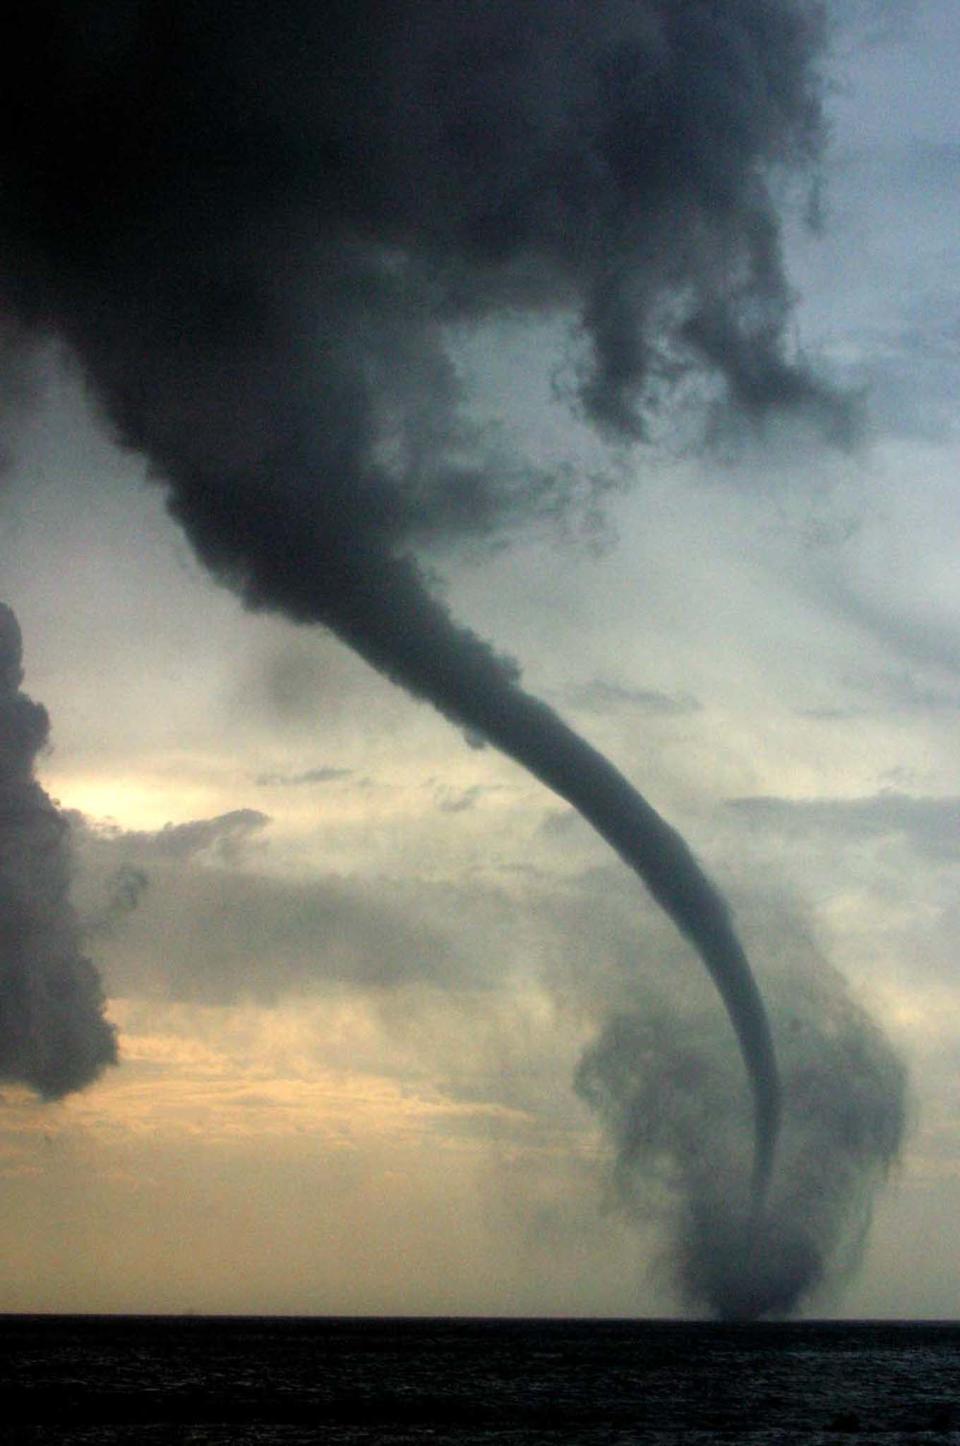 A waterspout builds up off the southern Cypriot coastal town of Limassol, January 27 2003. REUTERS/Andreas Manolis